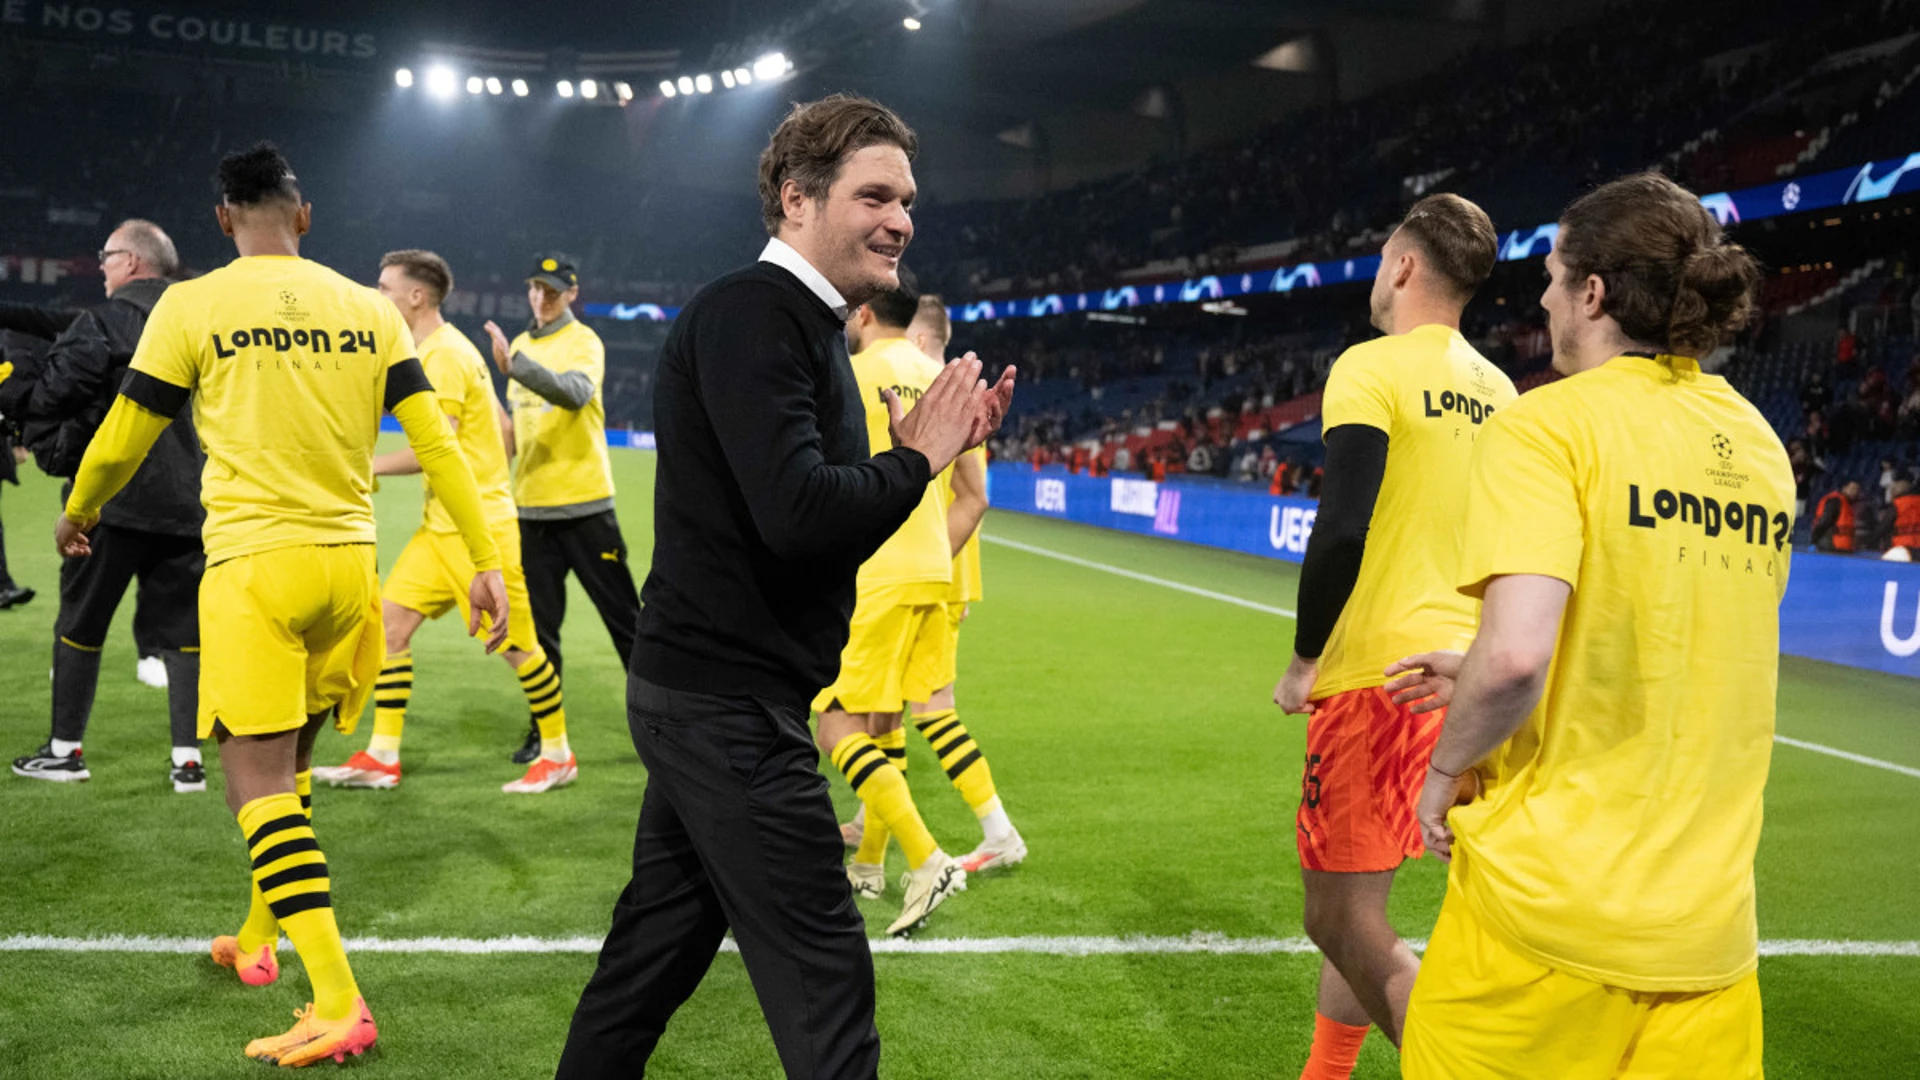 The next weeks must be the best of the season-Dortmund coach Terzic